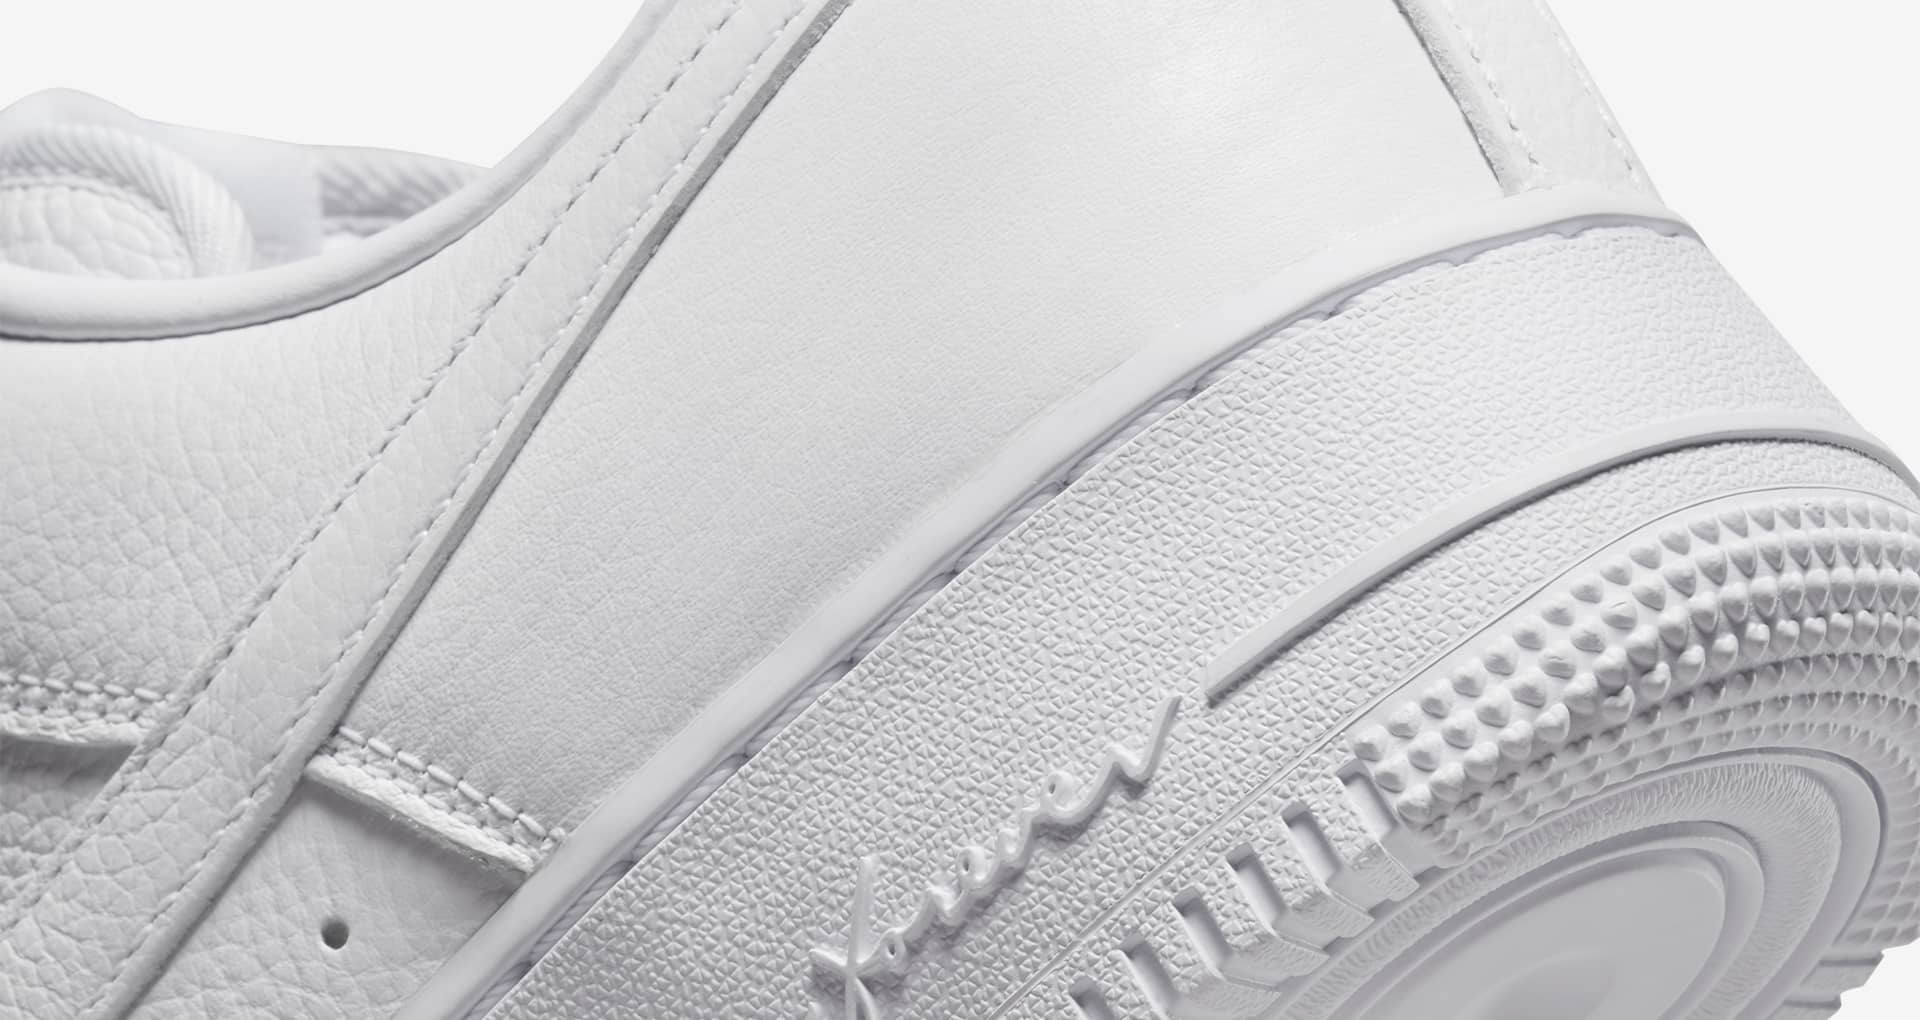 NOCTA Air Force 1 'White' (CZ8065-100) release date. Nike SNKRS MY